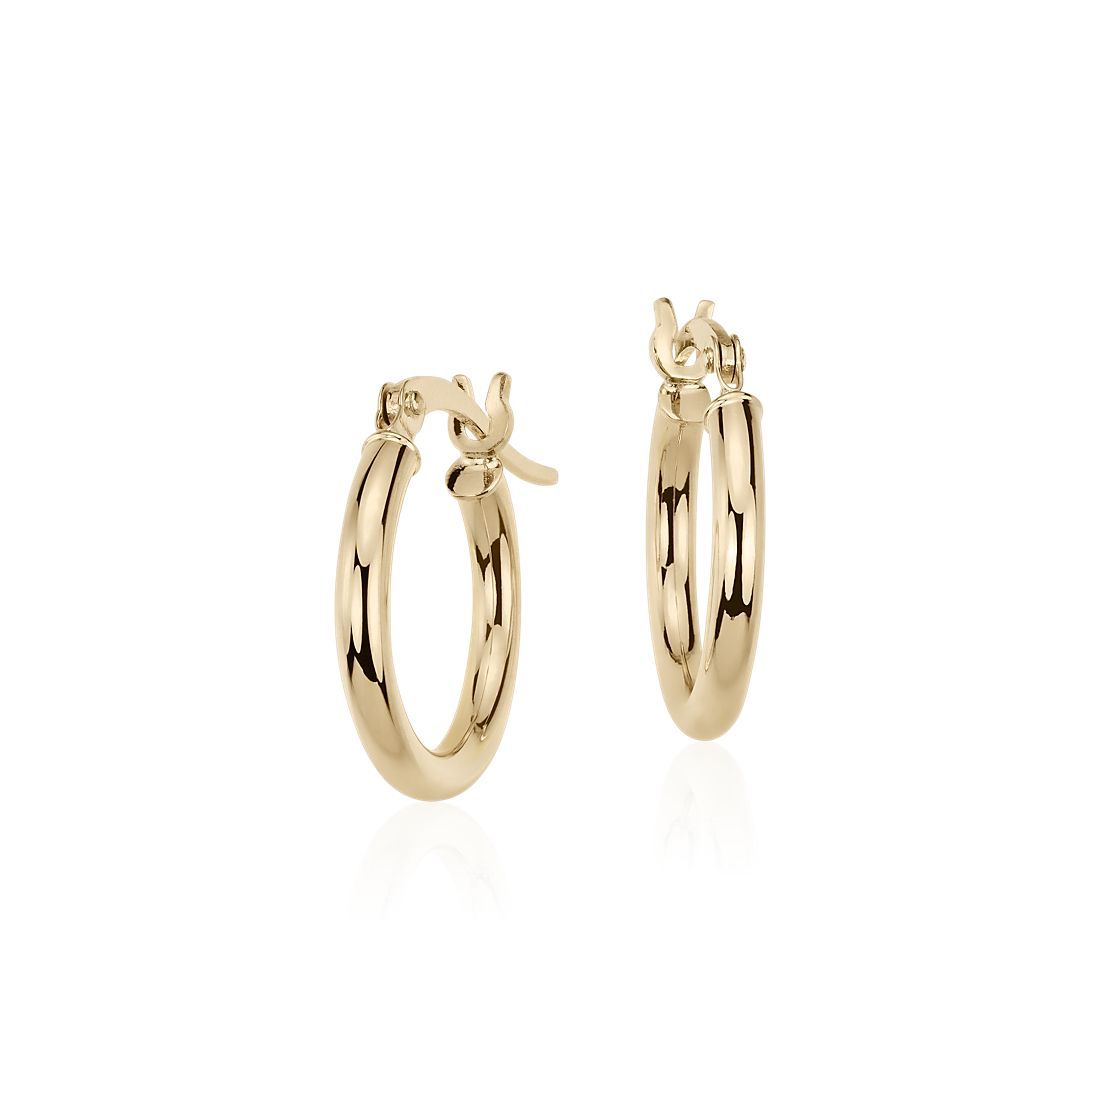 Small Hoop Earrings in 14k Yellow Gold (2 x 15 mm) | Blue Nile | Blue Nile